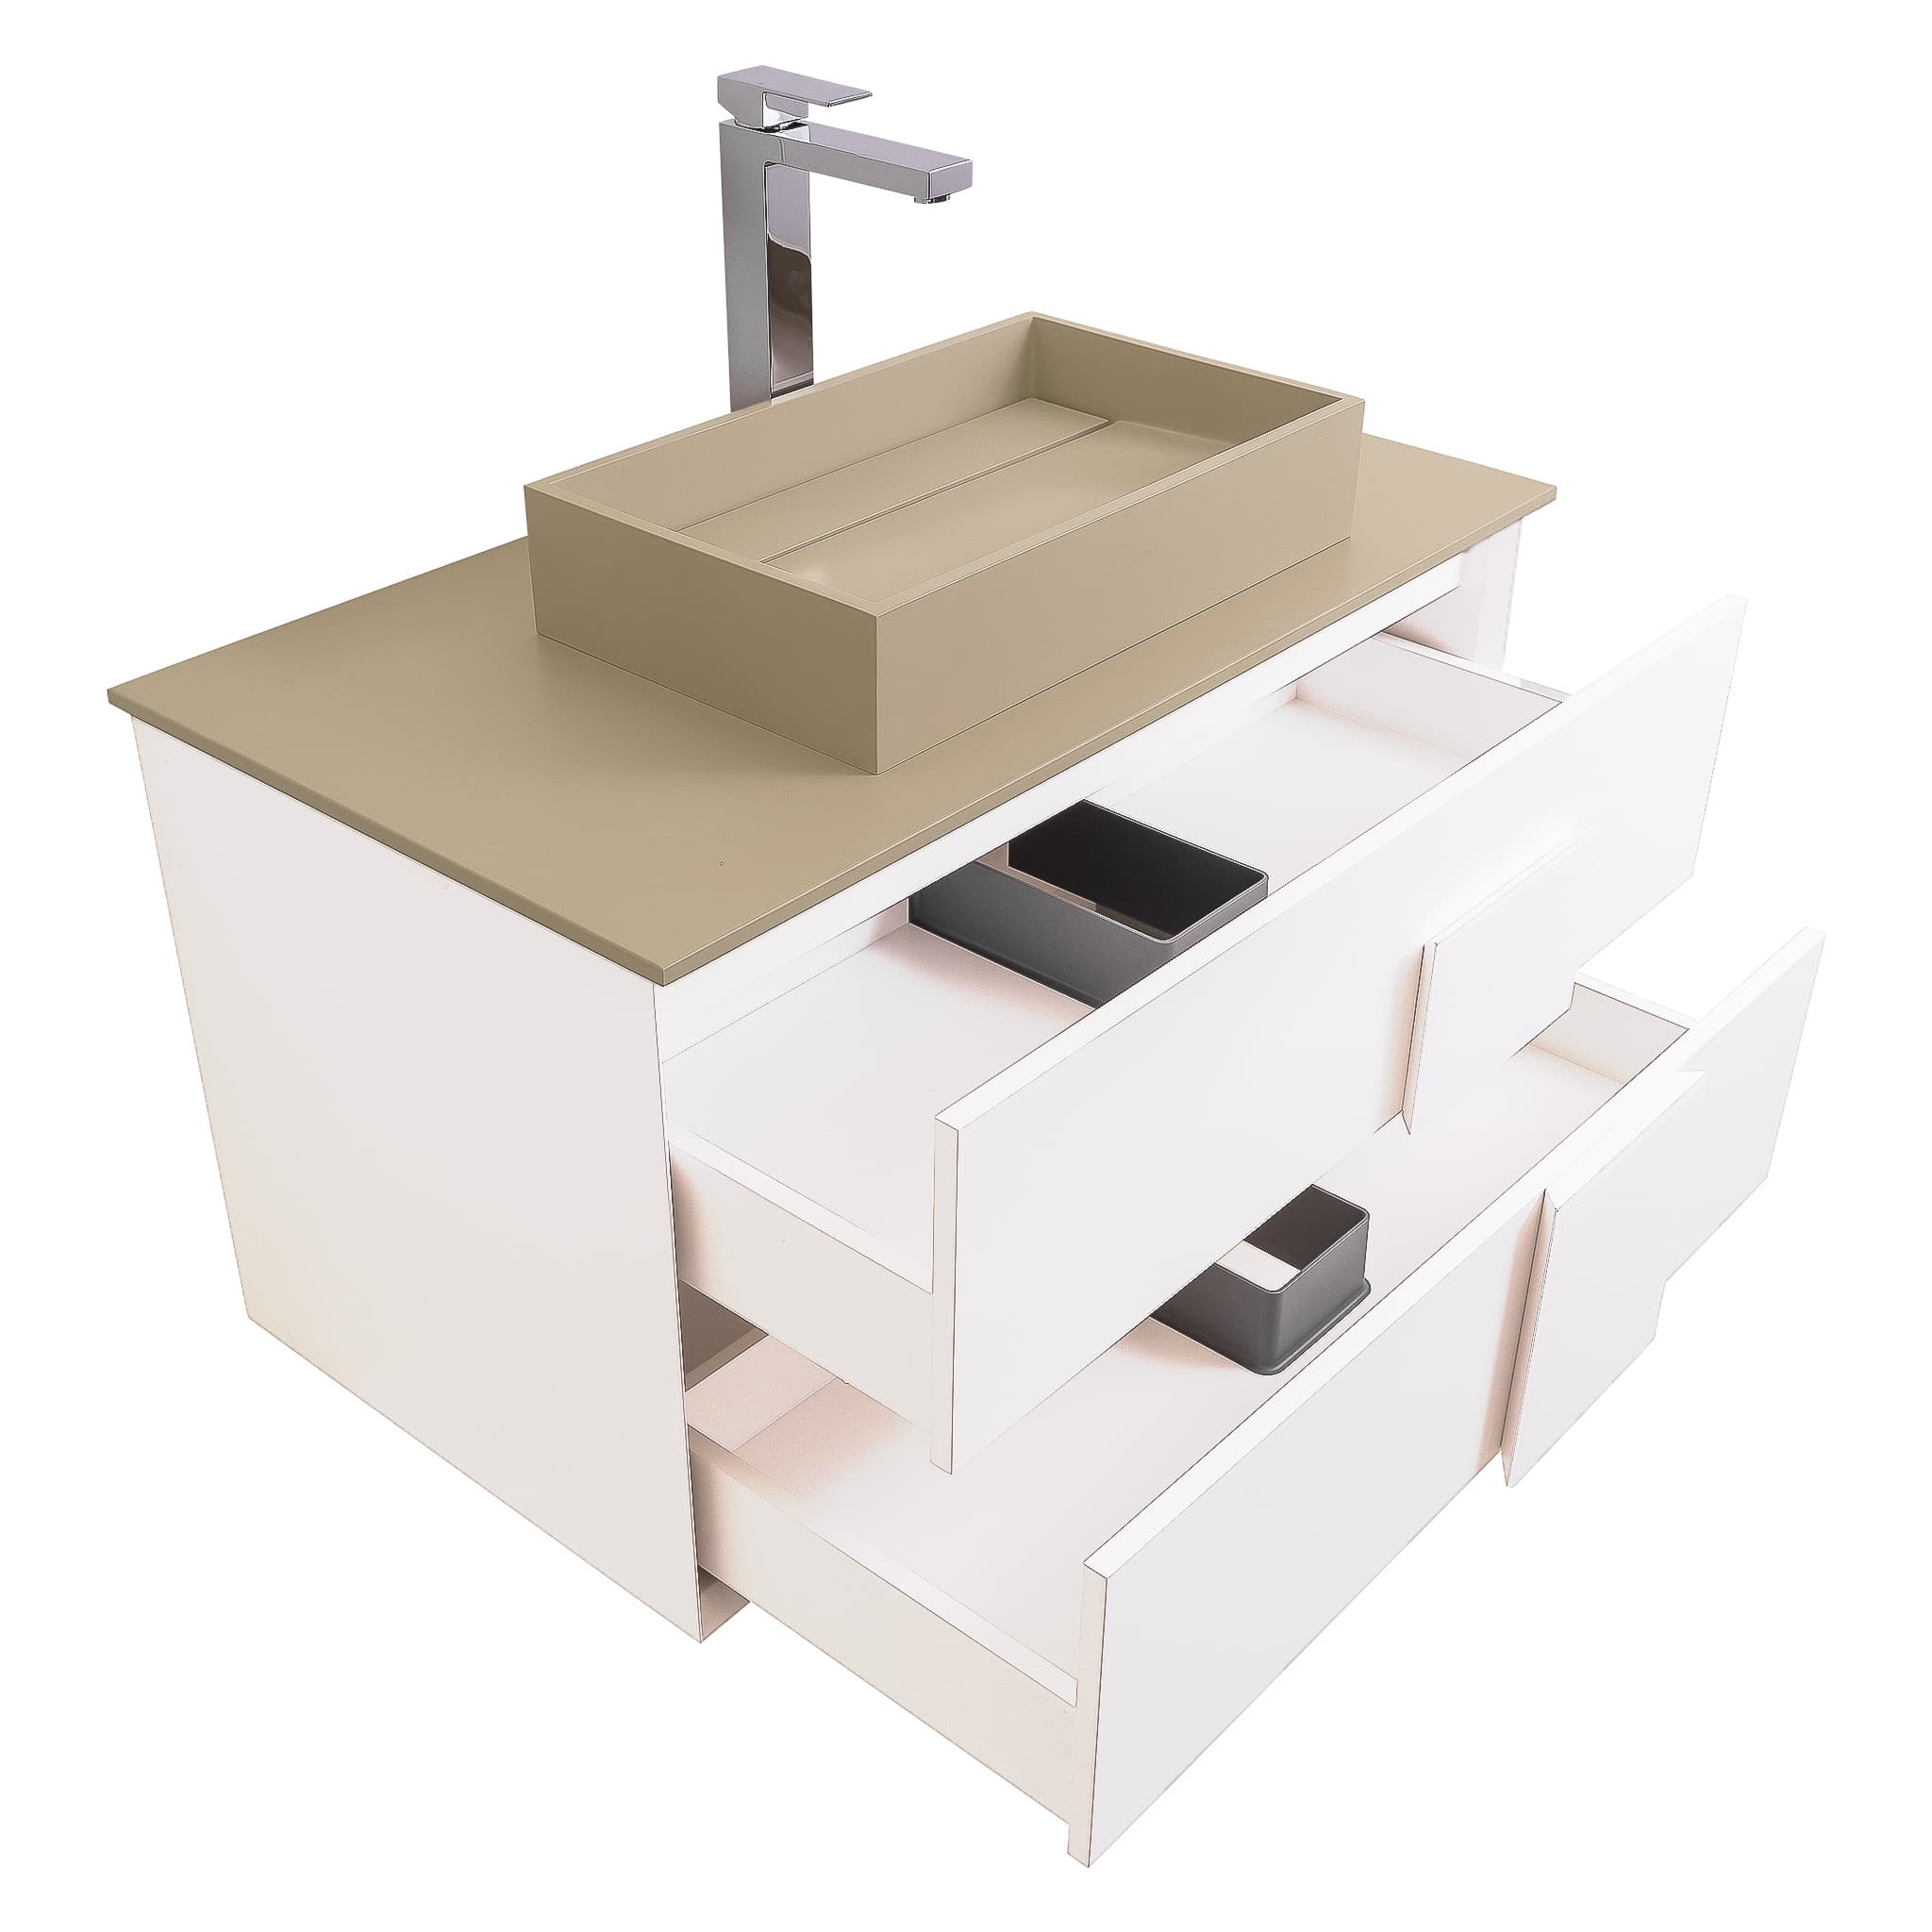 Piazza 31.5 Matte White With White Handle Cabinet, Solid Surface Flat Taupe Counter and Infinity Square Solid Surface Taupe Basin 1329, Wall Mounted Modern Vanity Set